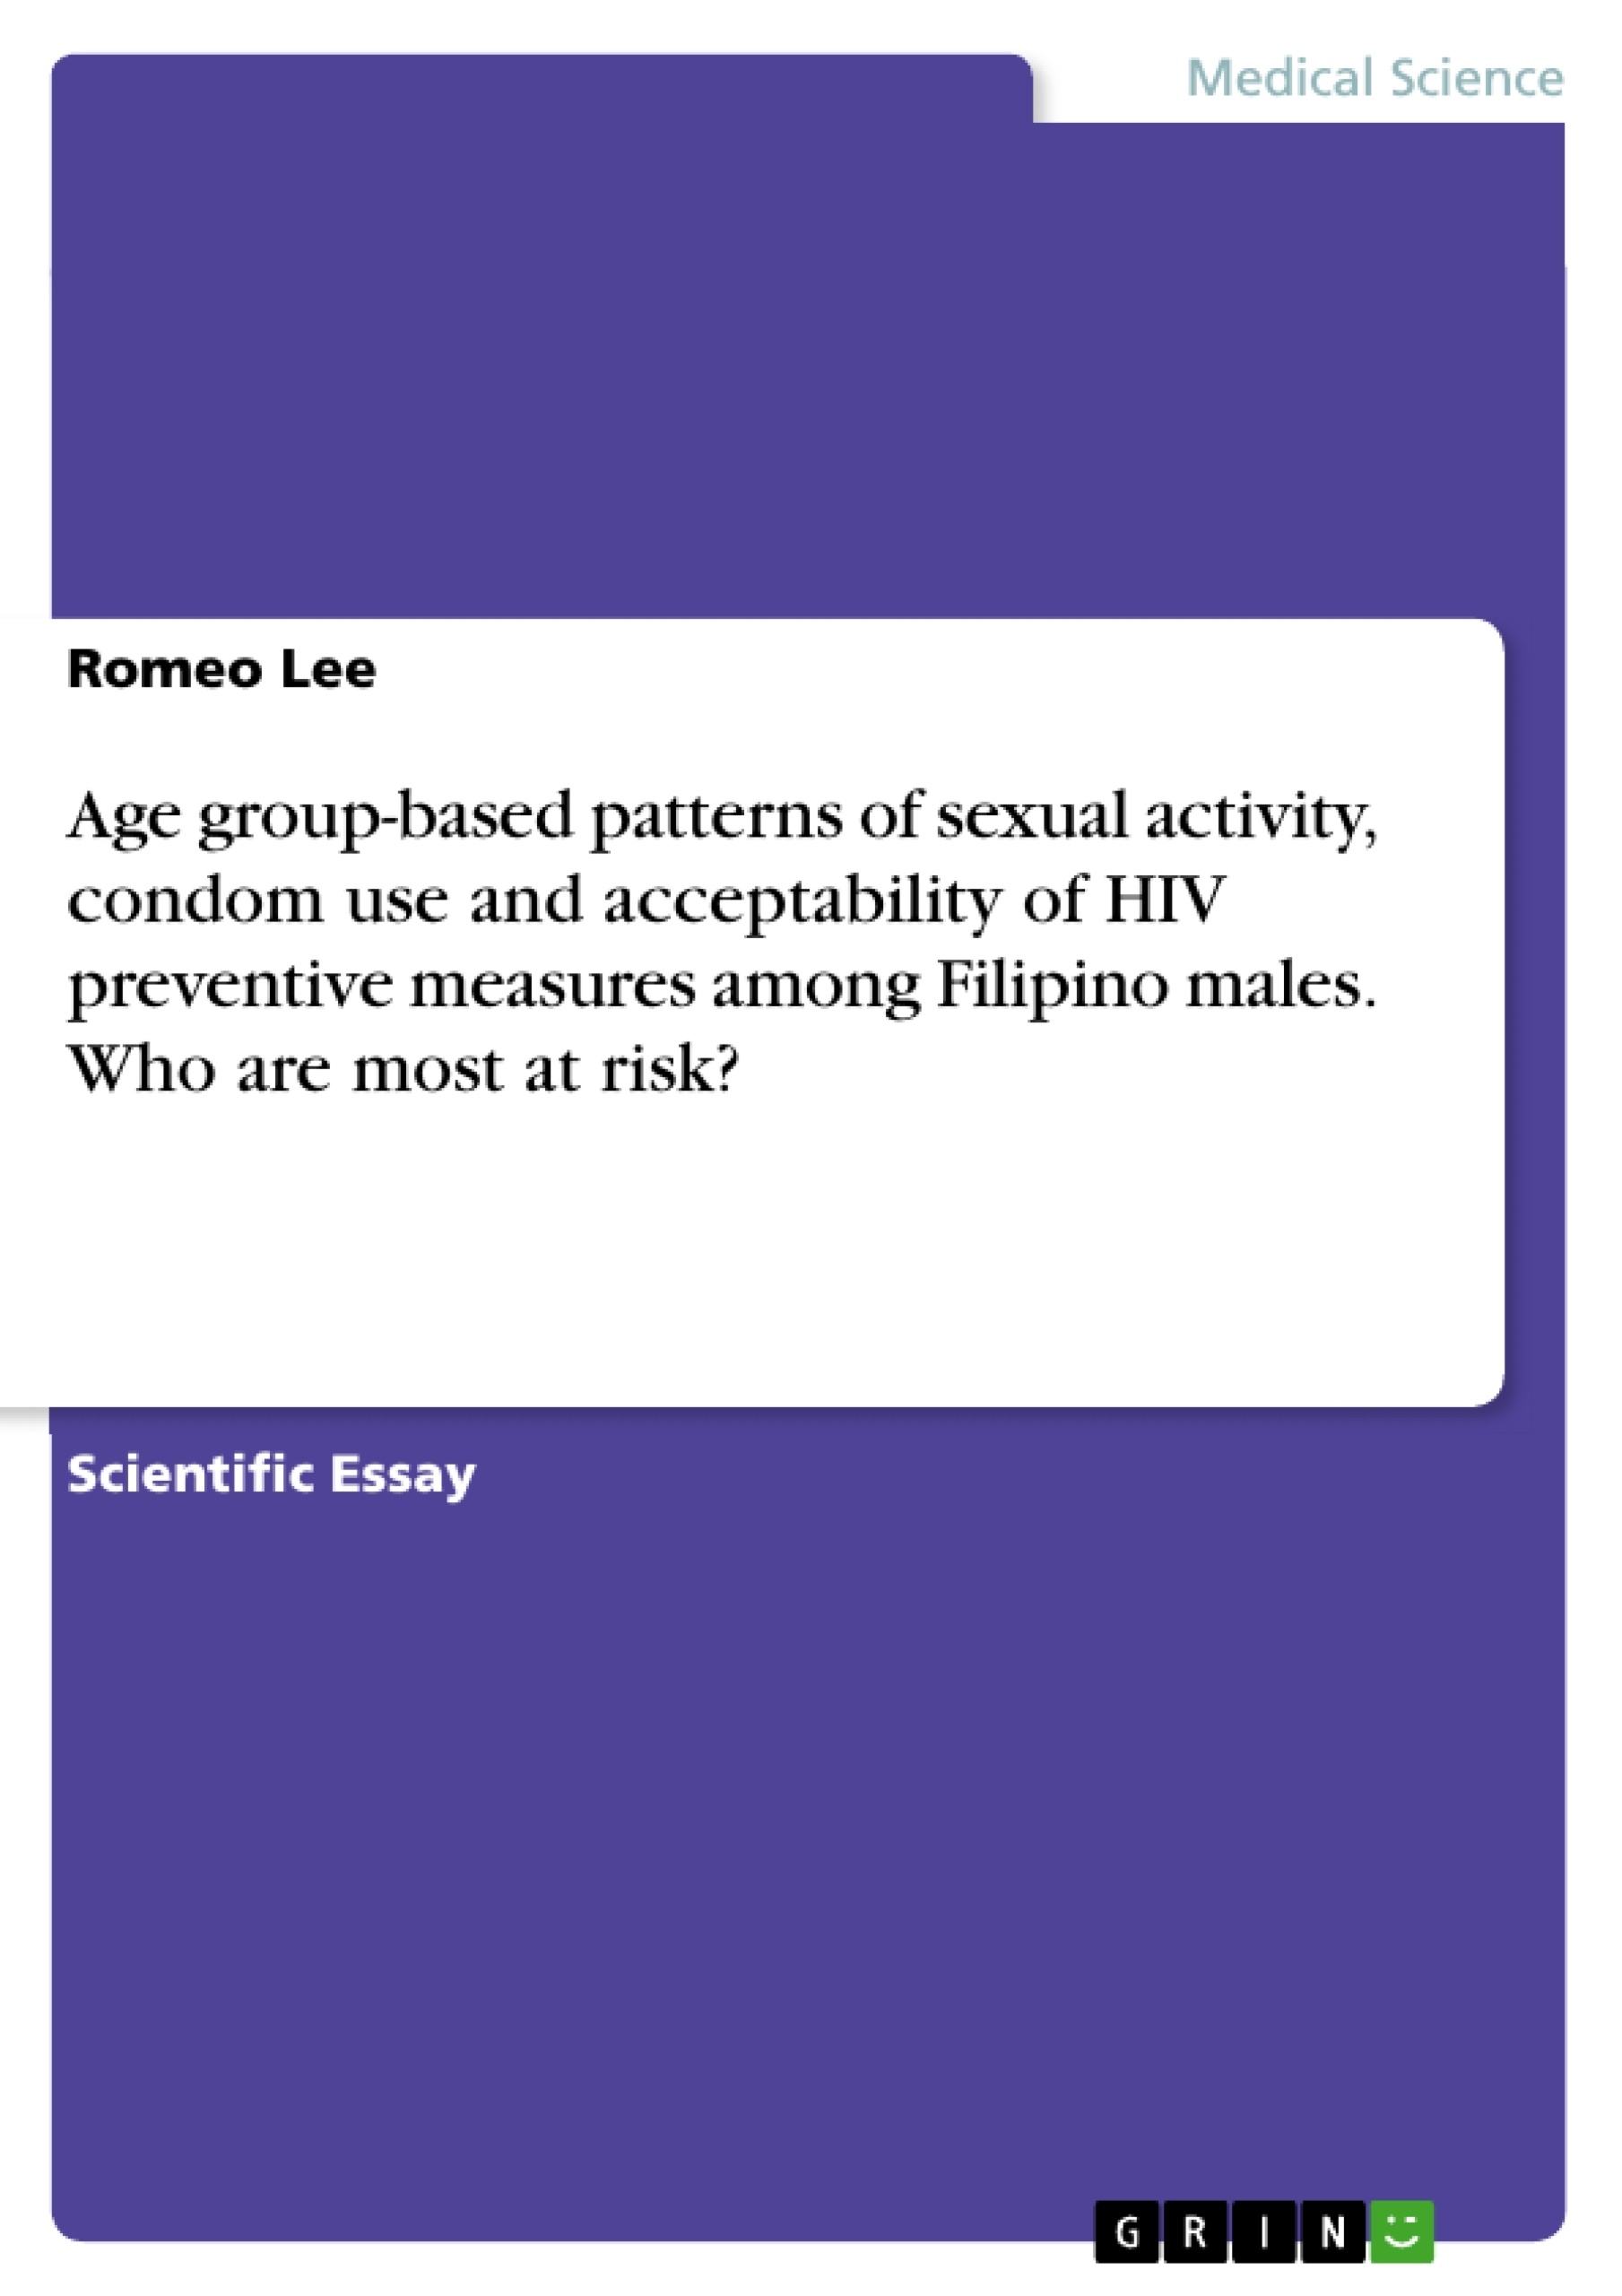 Titre: Age group-based patterns of sexual activity, condom use and acceptability of HIV preventive measures among Filipino males. Who are most at risk?